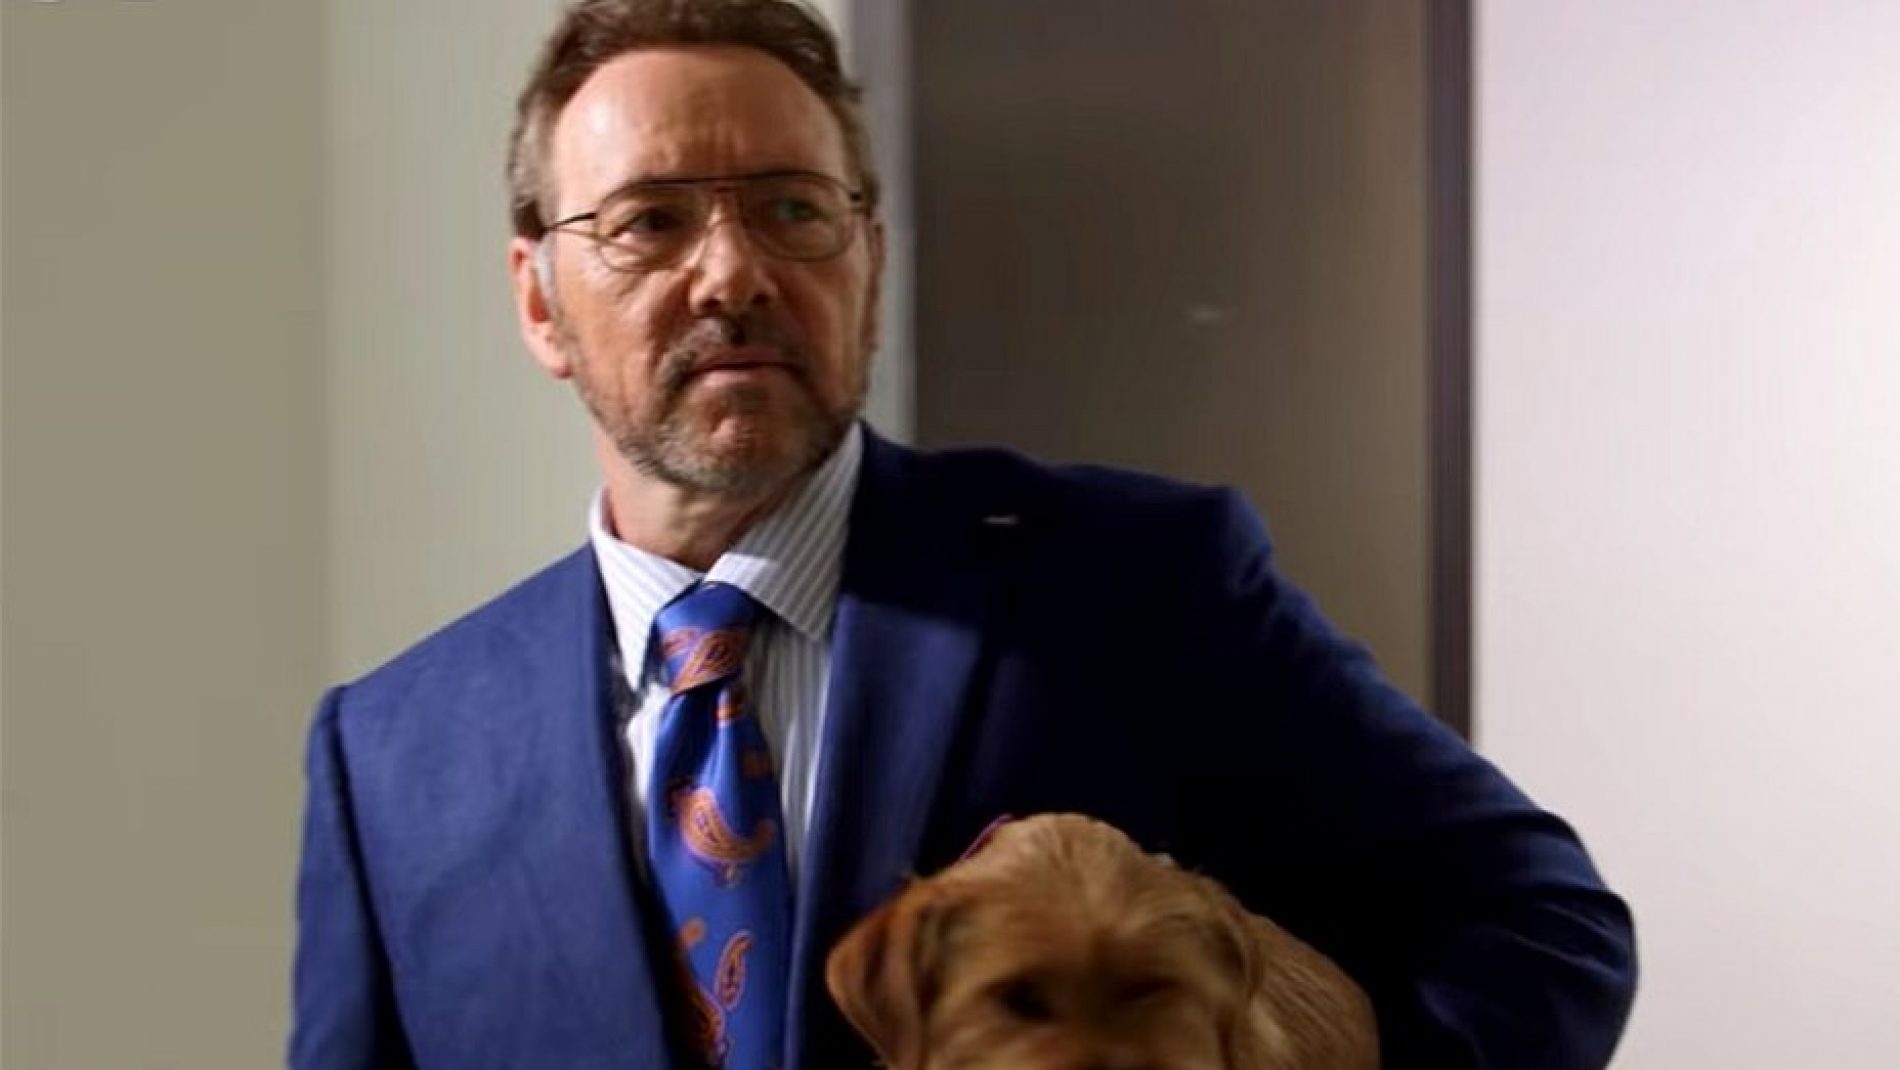 Kevin Spacey’s new movie flops at the box office